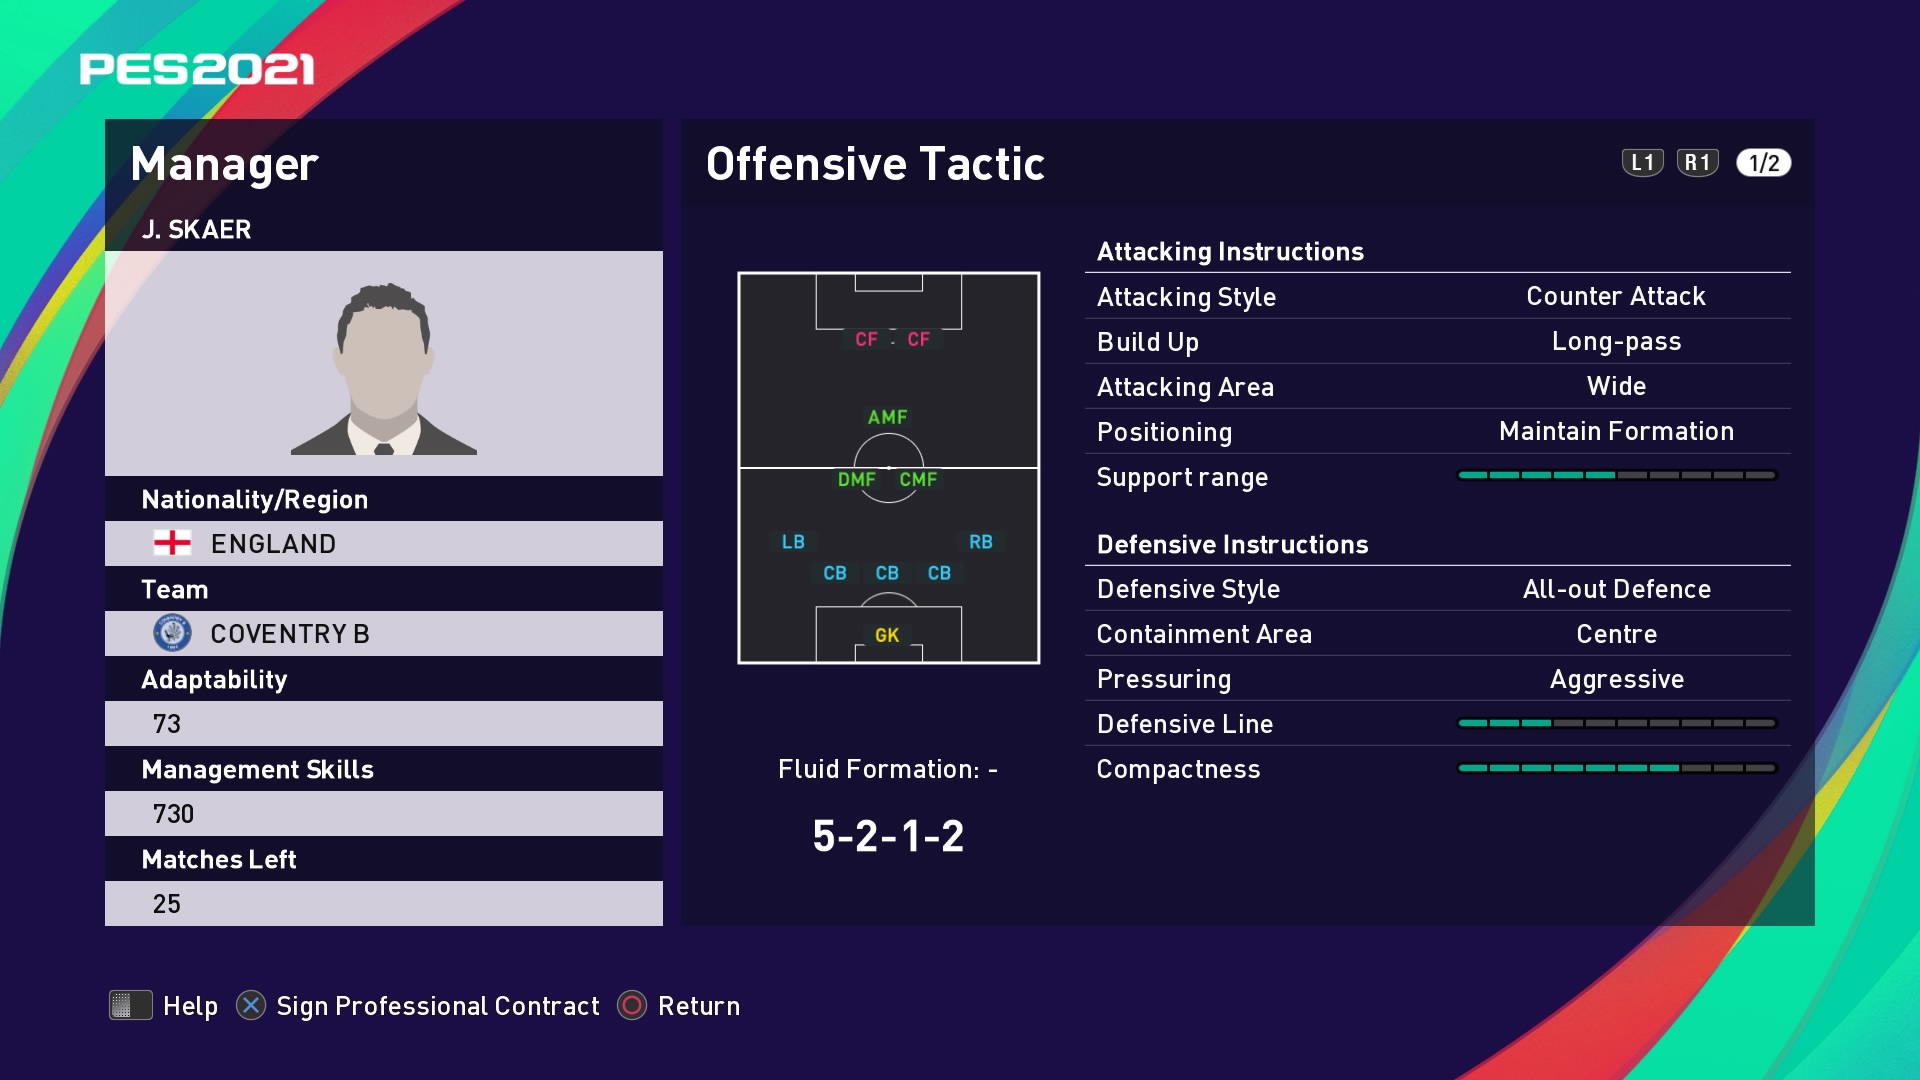 J. Skaer (2) (Mark Robins) Offensive Tactic in PES 2021 myClub